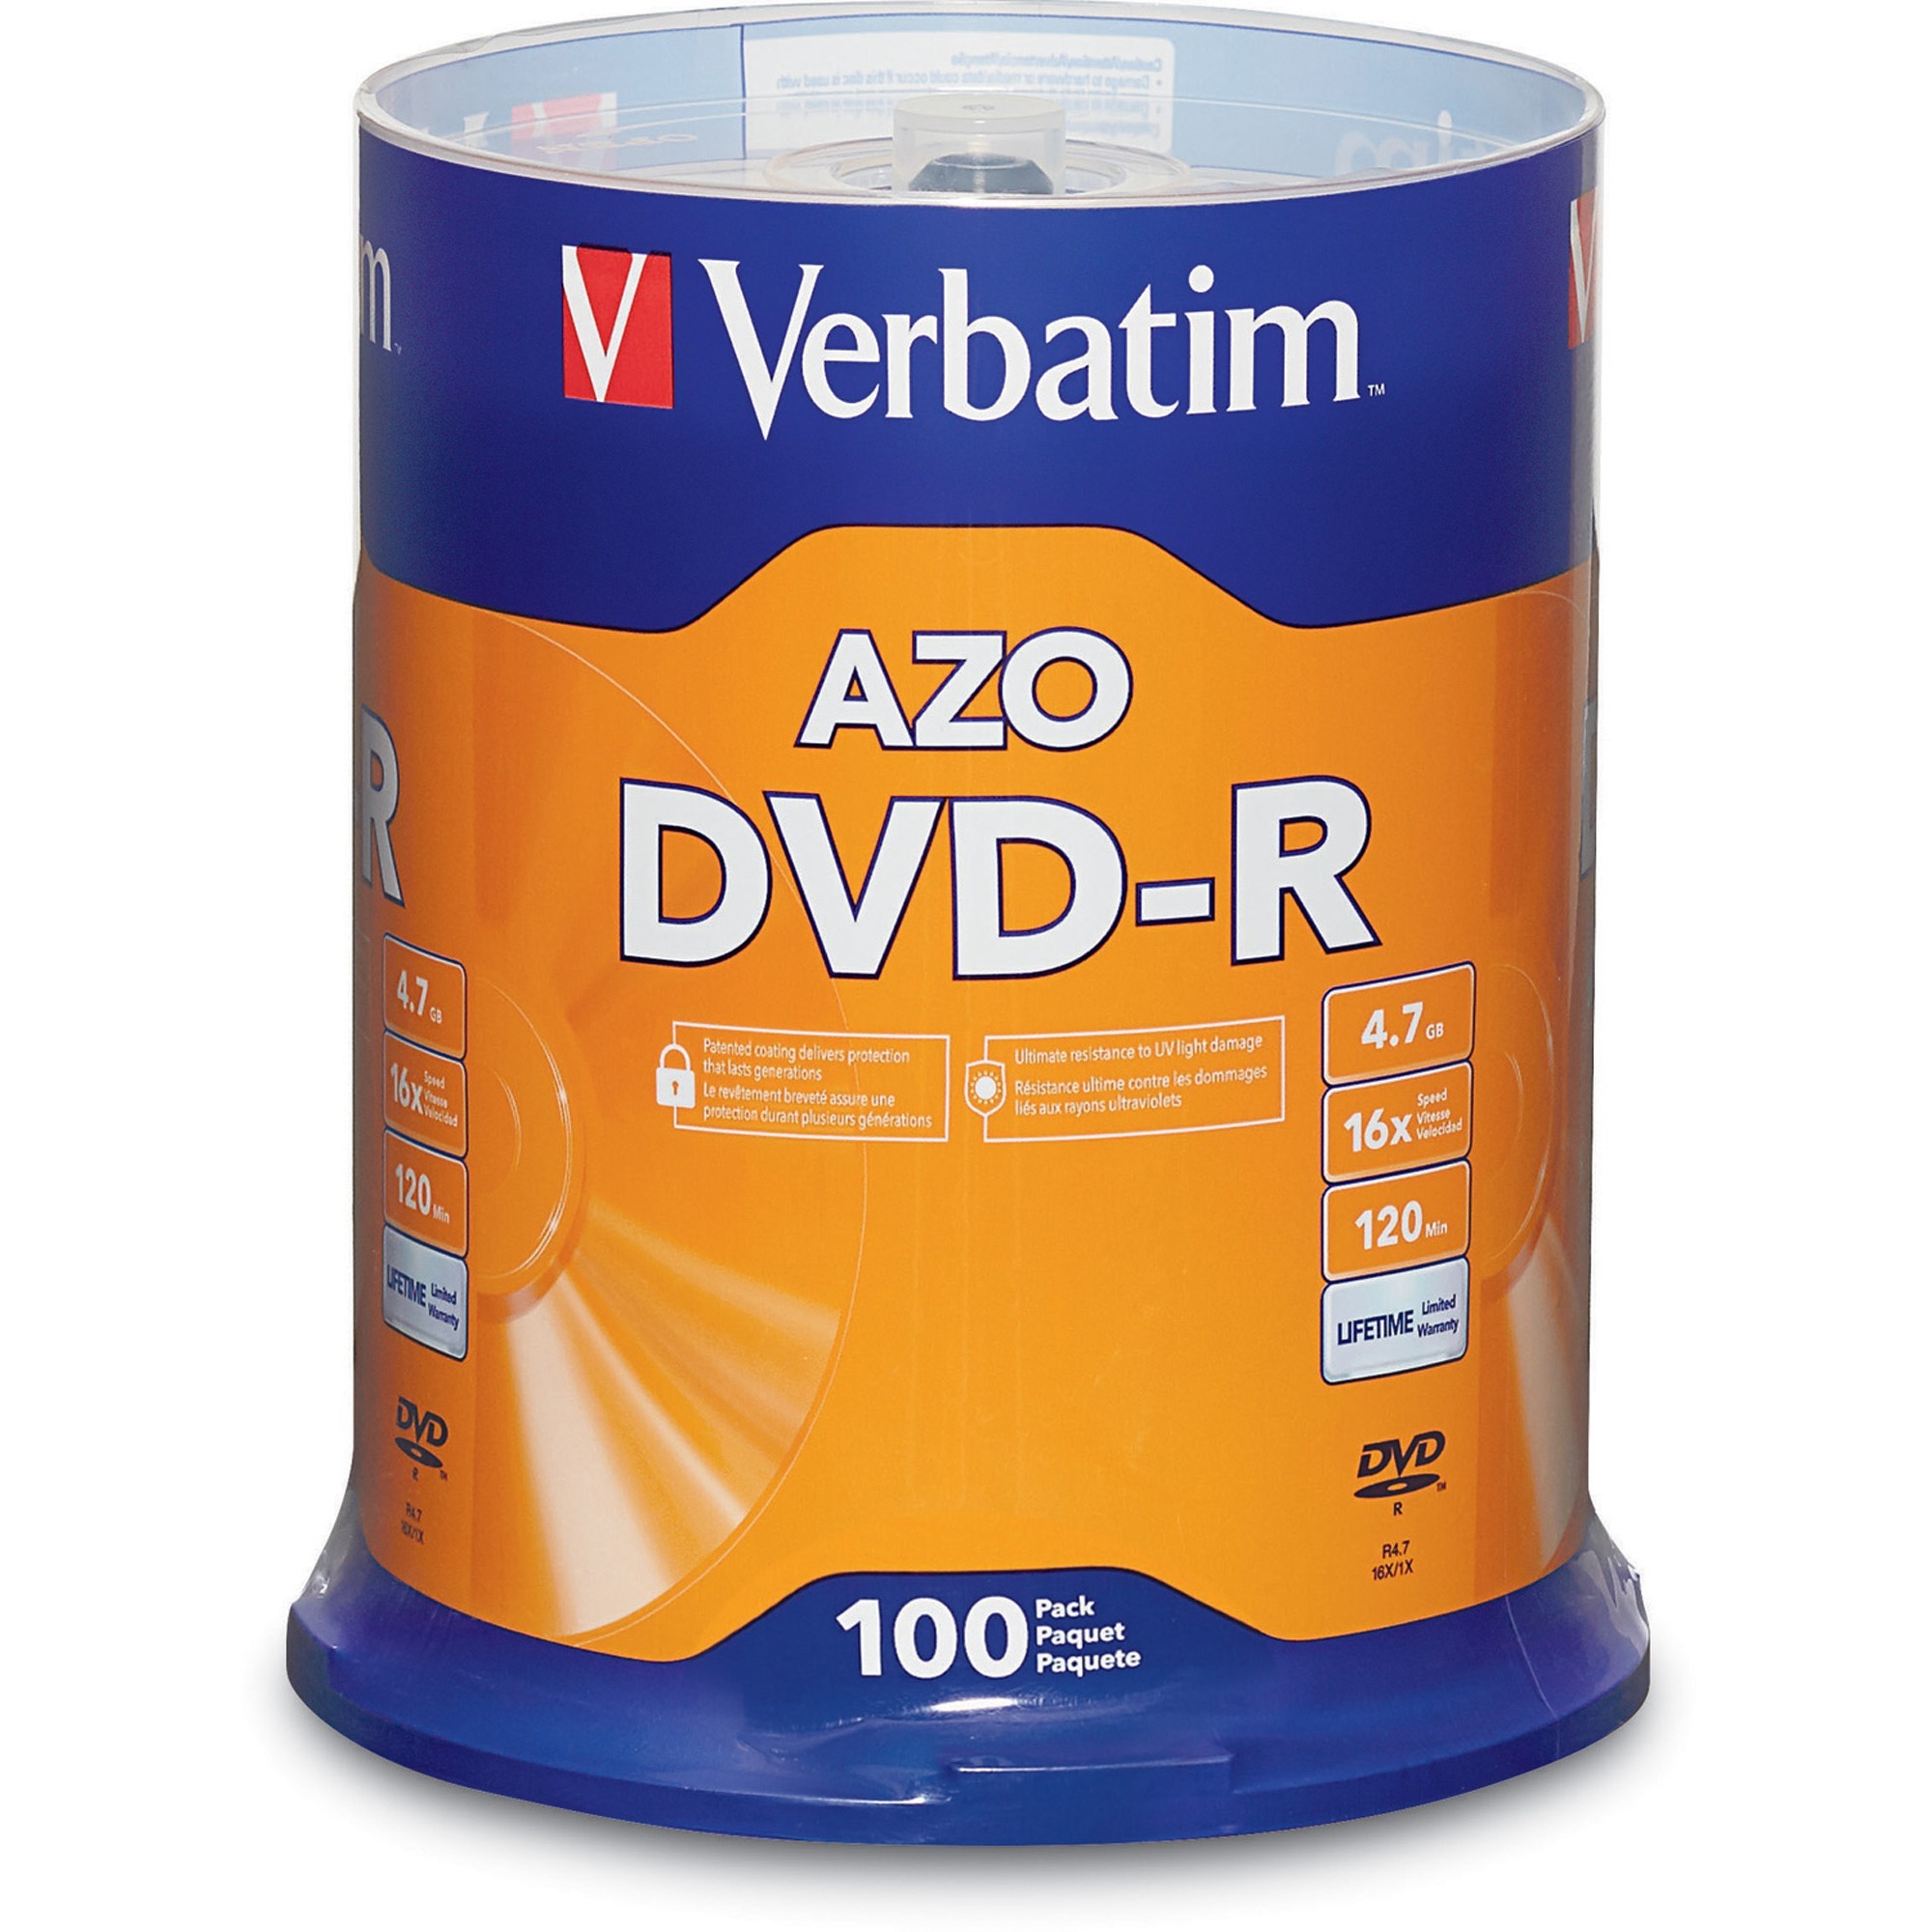 CD R Blank Discs, 52X 700MB Recordable Disc Blank CDs For Burning And  Storing Digital Images Music Data Audio Stable Performance